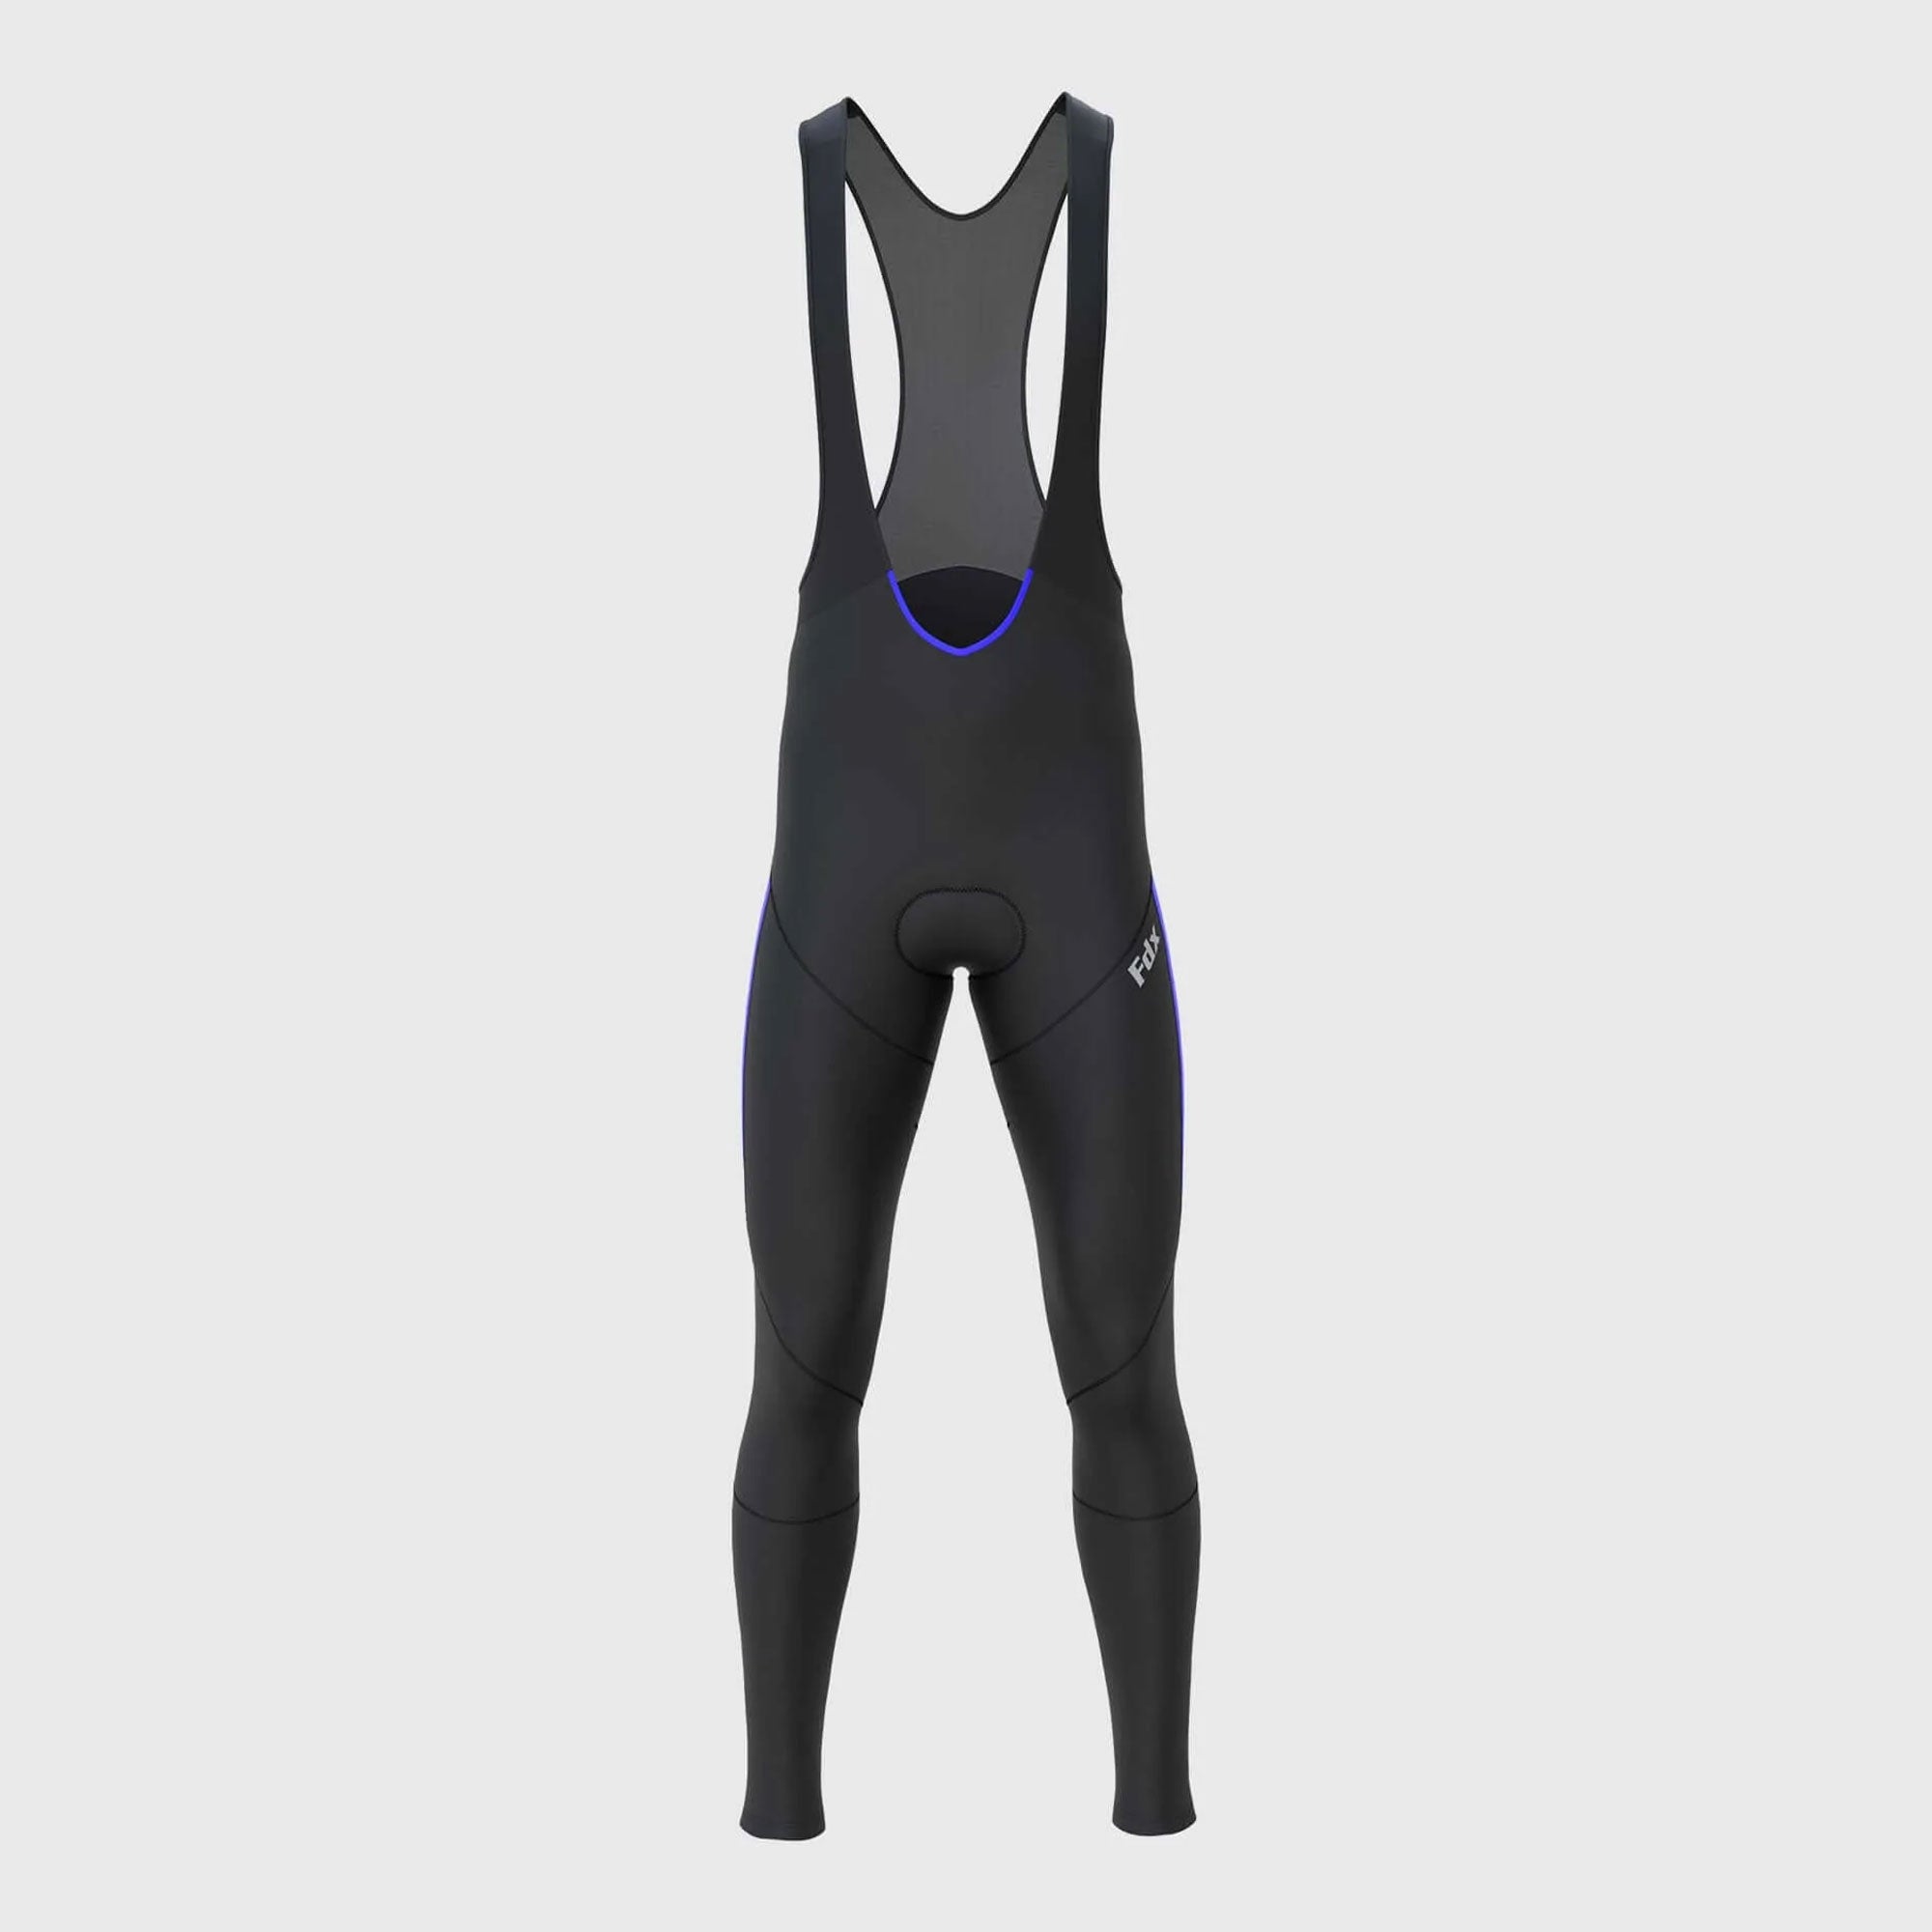 Fdx Arch Men's Blue Thermal Padded Cycling Cargo Bib Tights